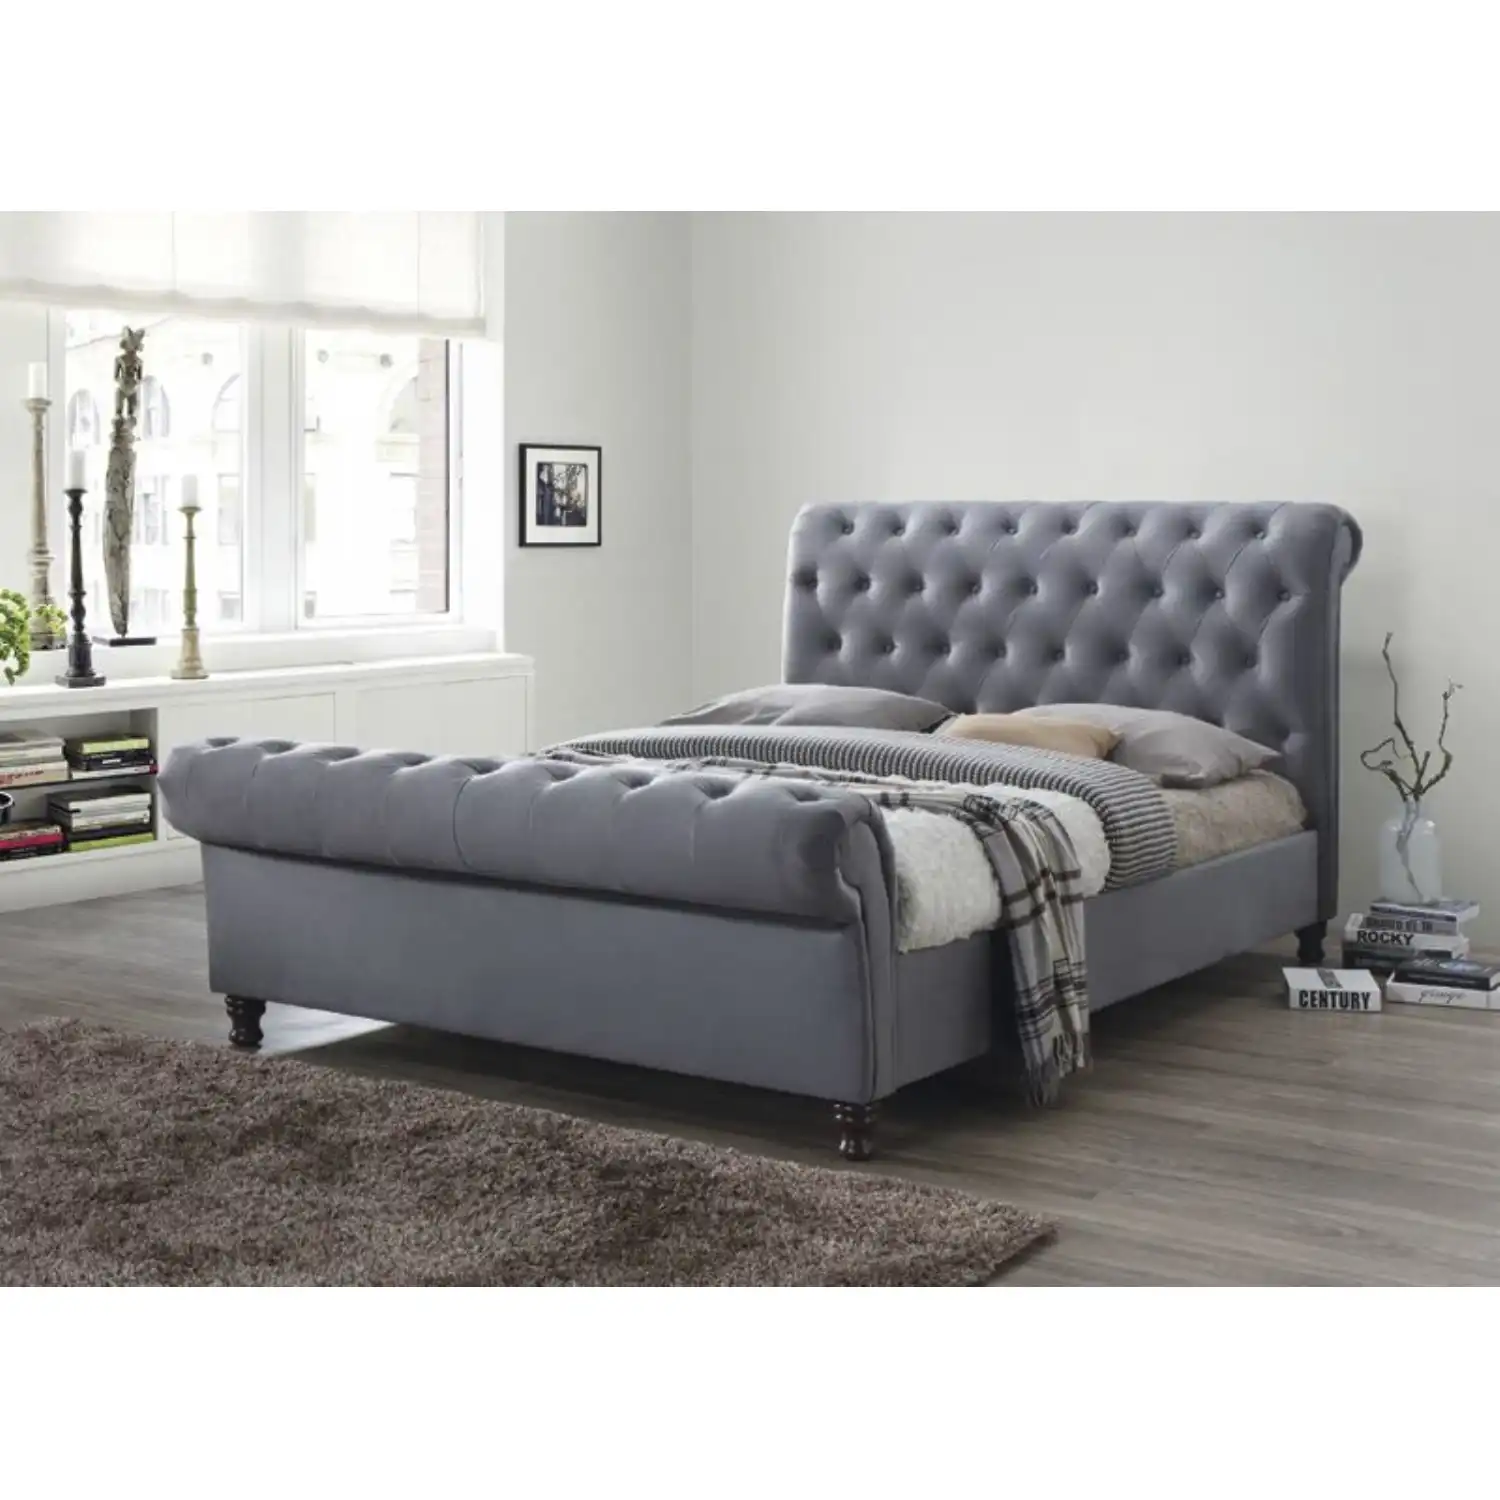 Grey Fabric King Size Scrolled Buttoned Bed